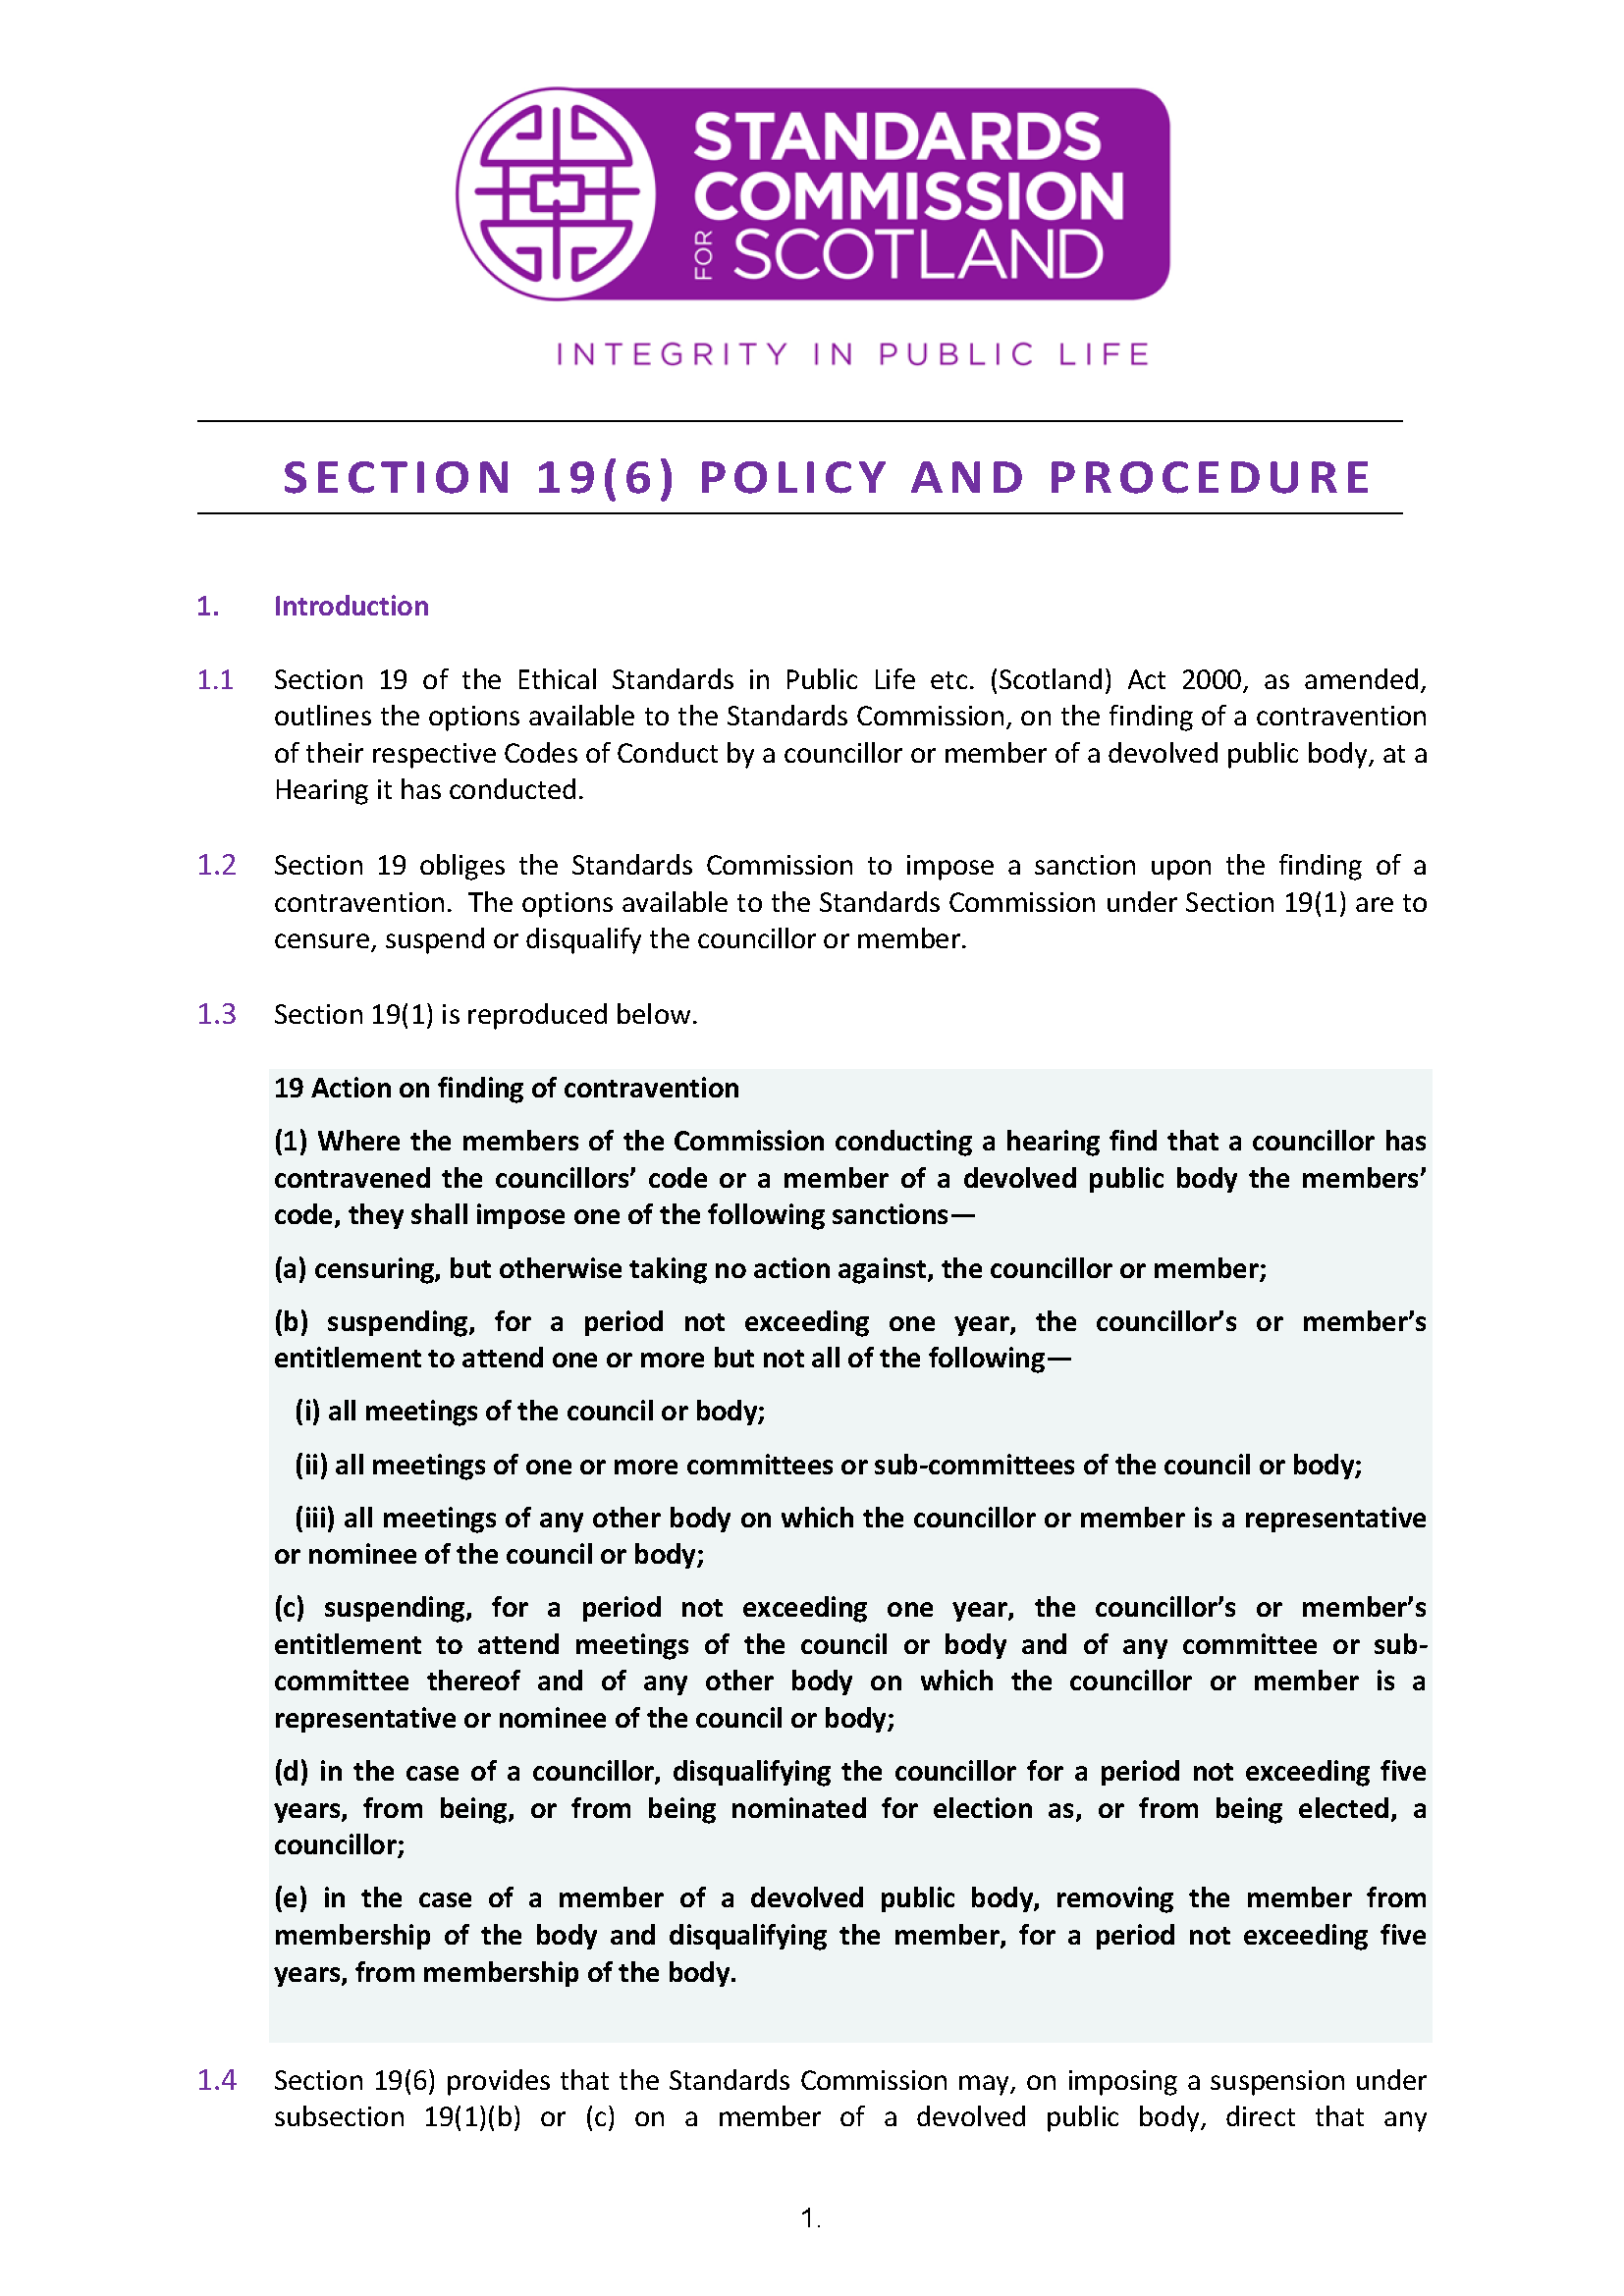 Section 19(6) Policy - Imposing a suspension on a member of a devolved public body